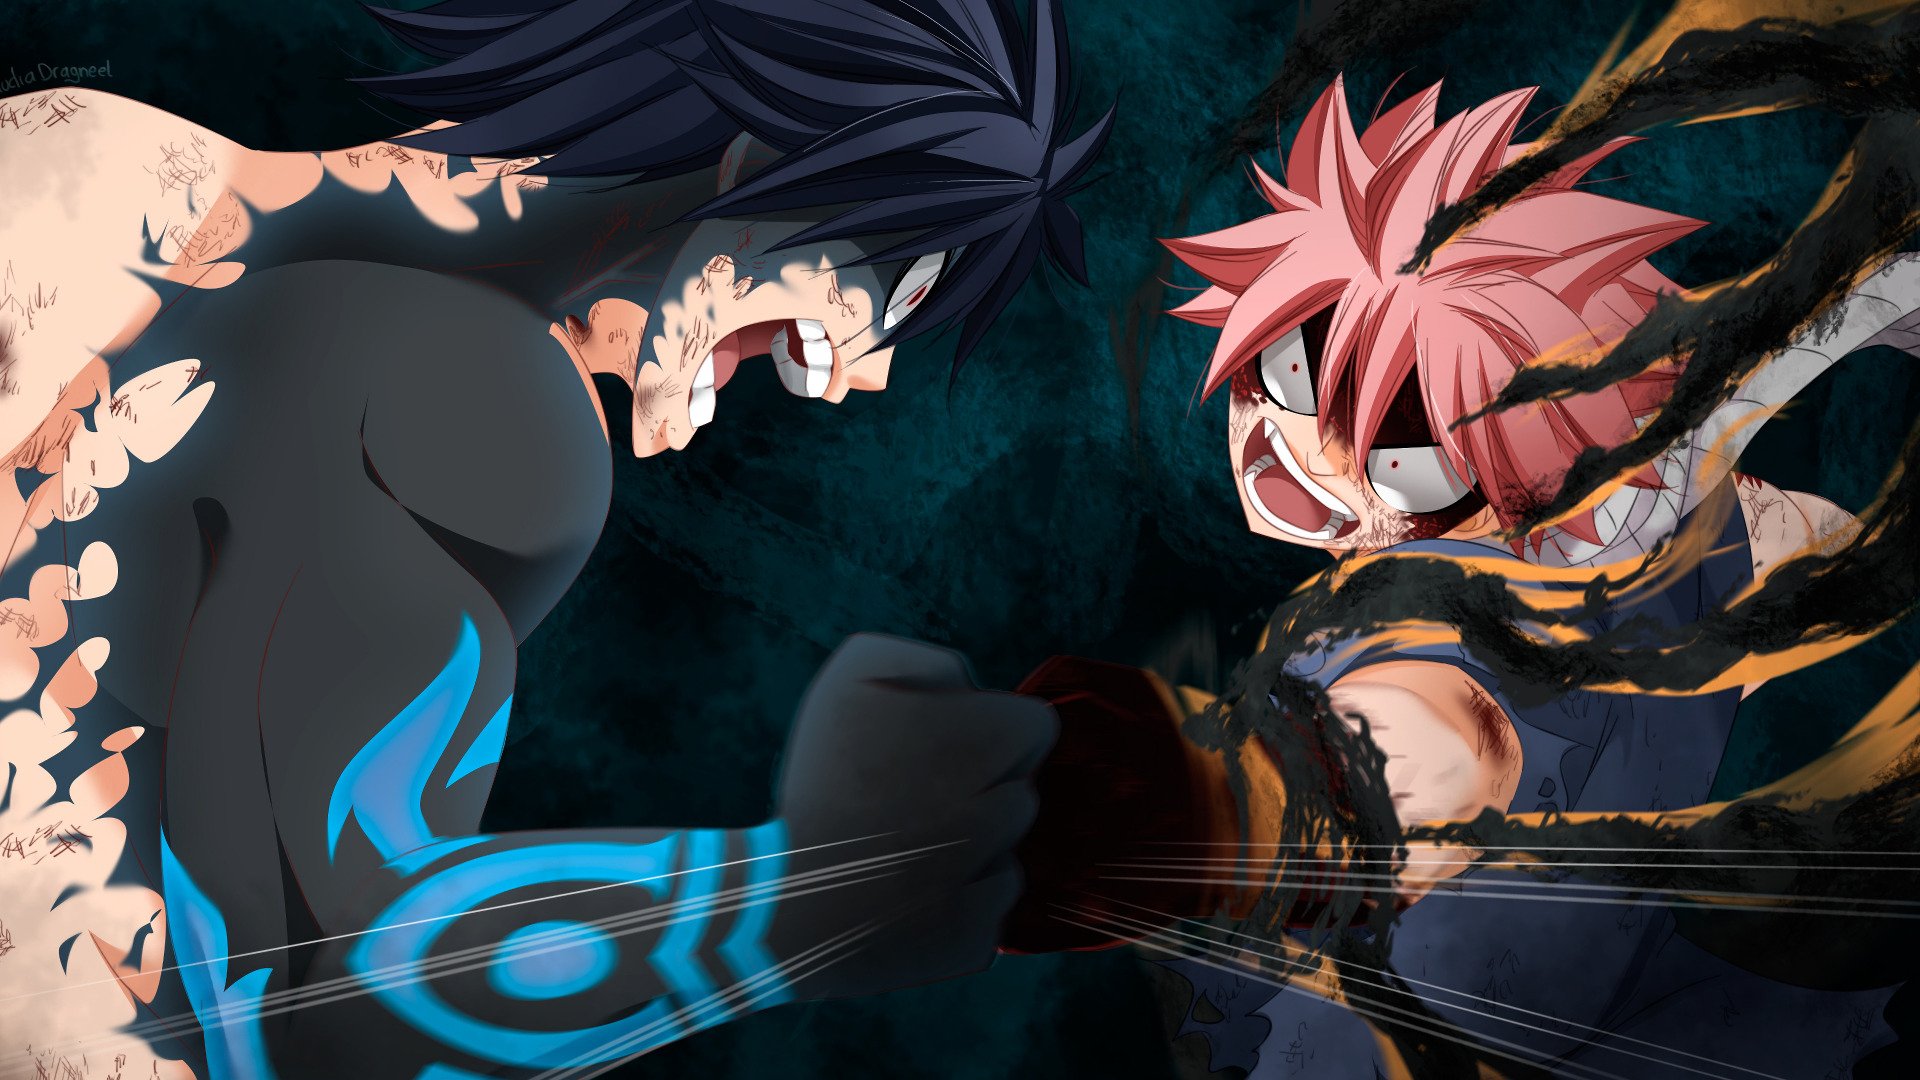 Fairy Tail HD Wallpaper | Background Image | 1920x1080 | ID:992293 - Wallpaper Abyss